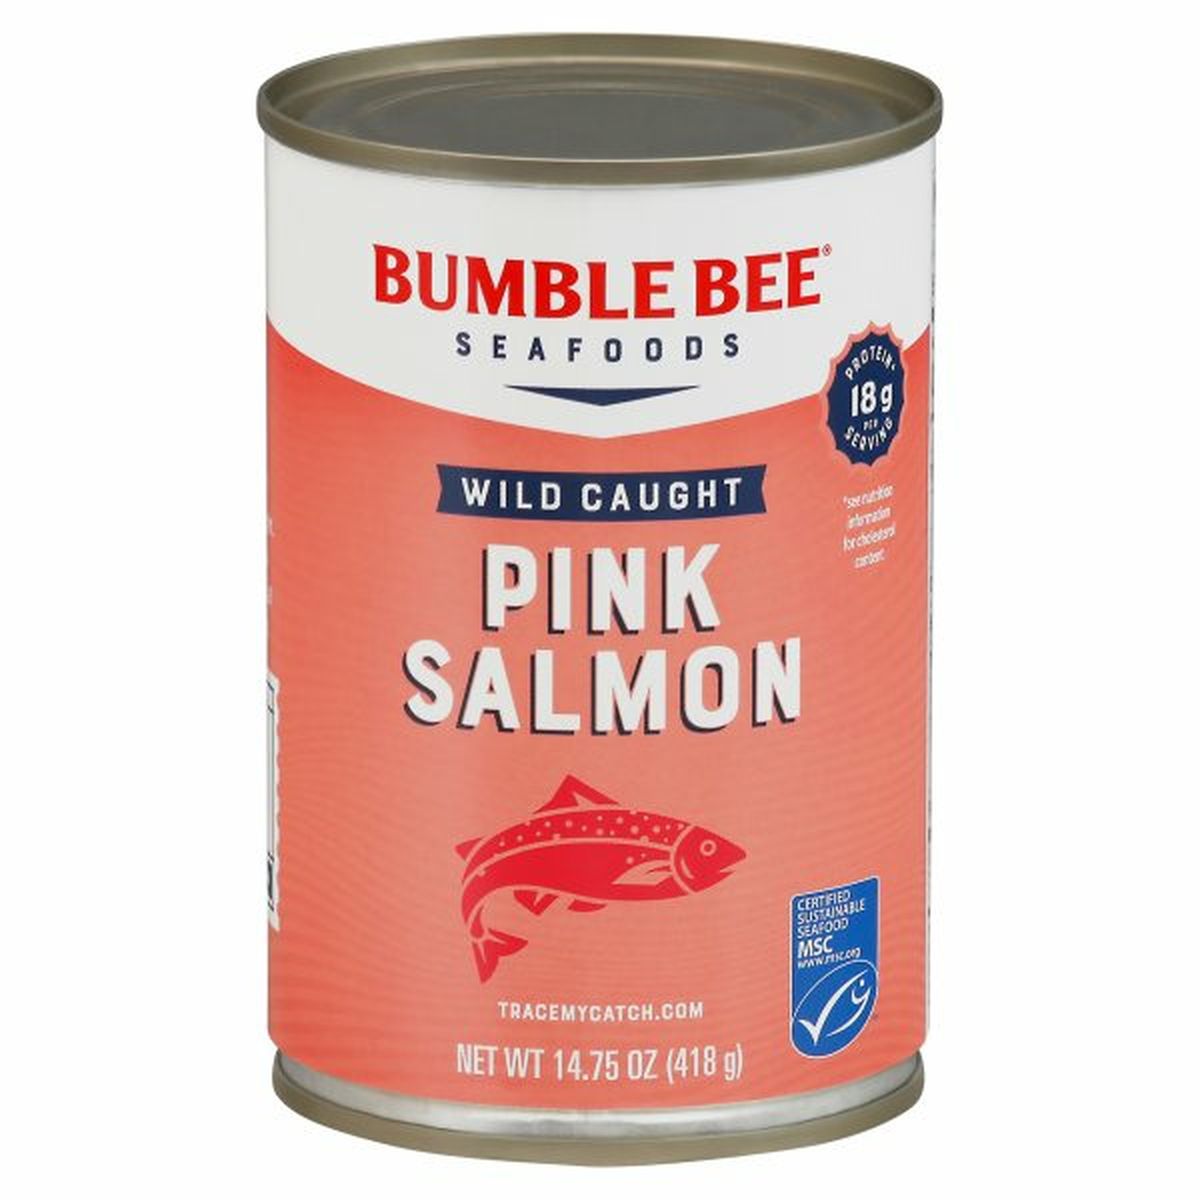 Calories in Bumble Bee Pink Salmon